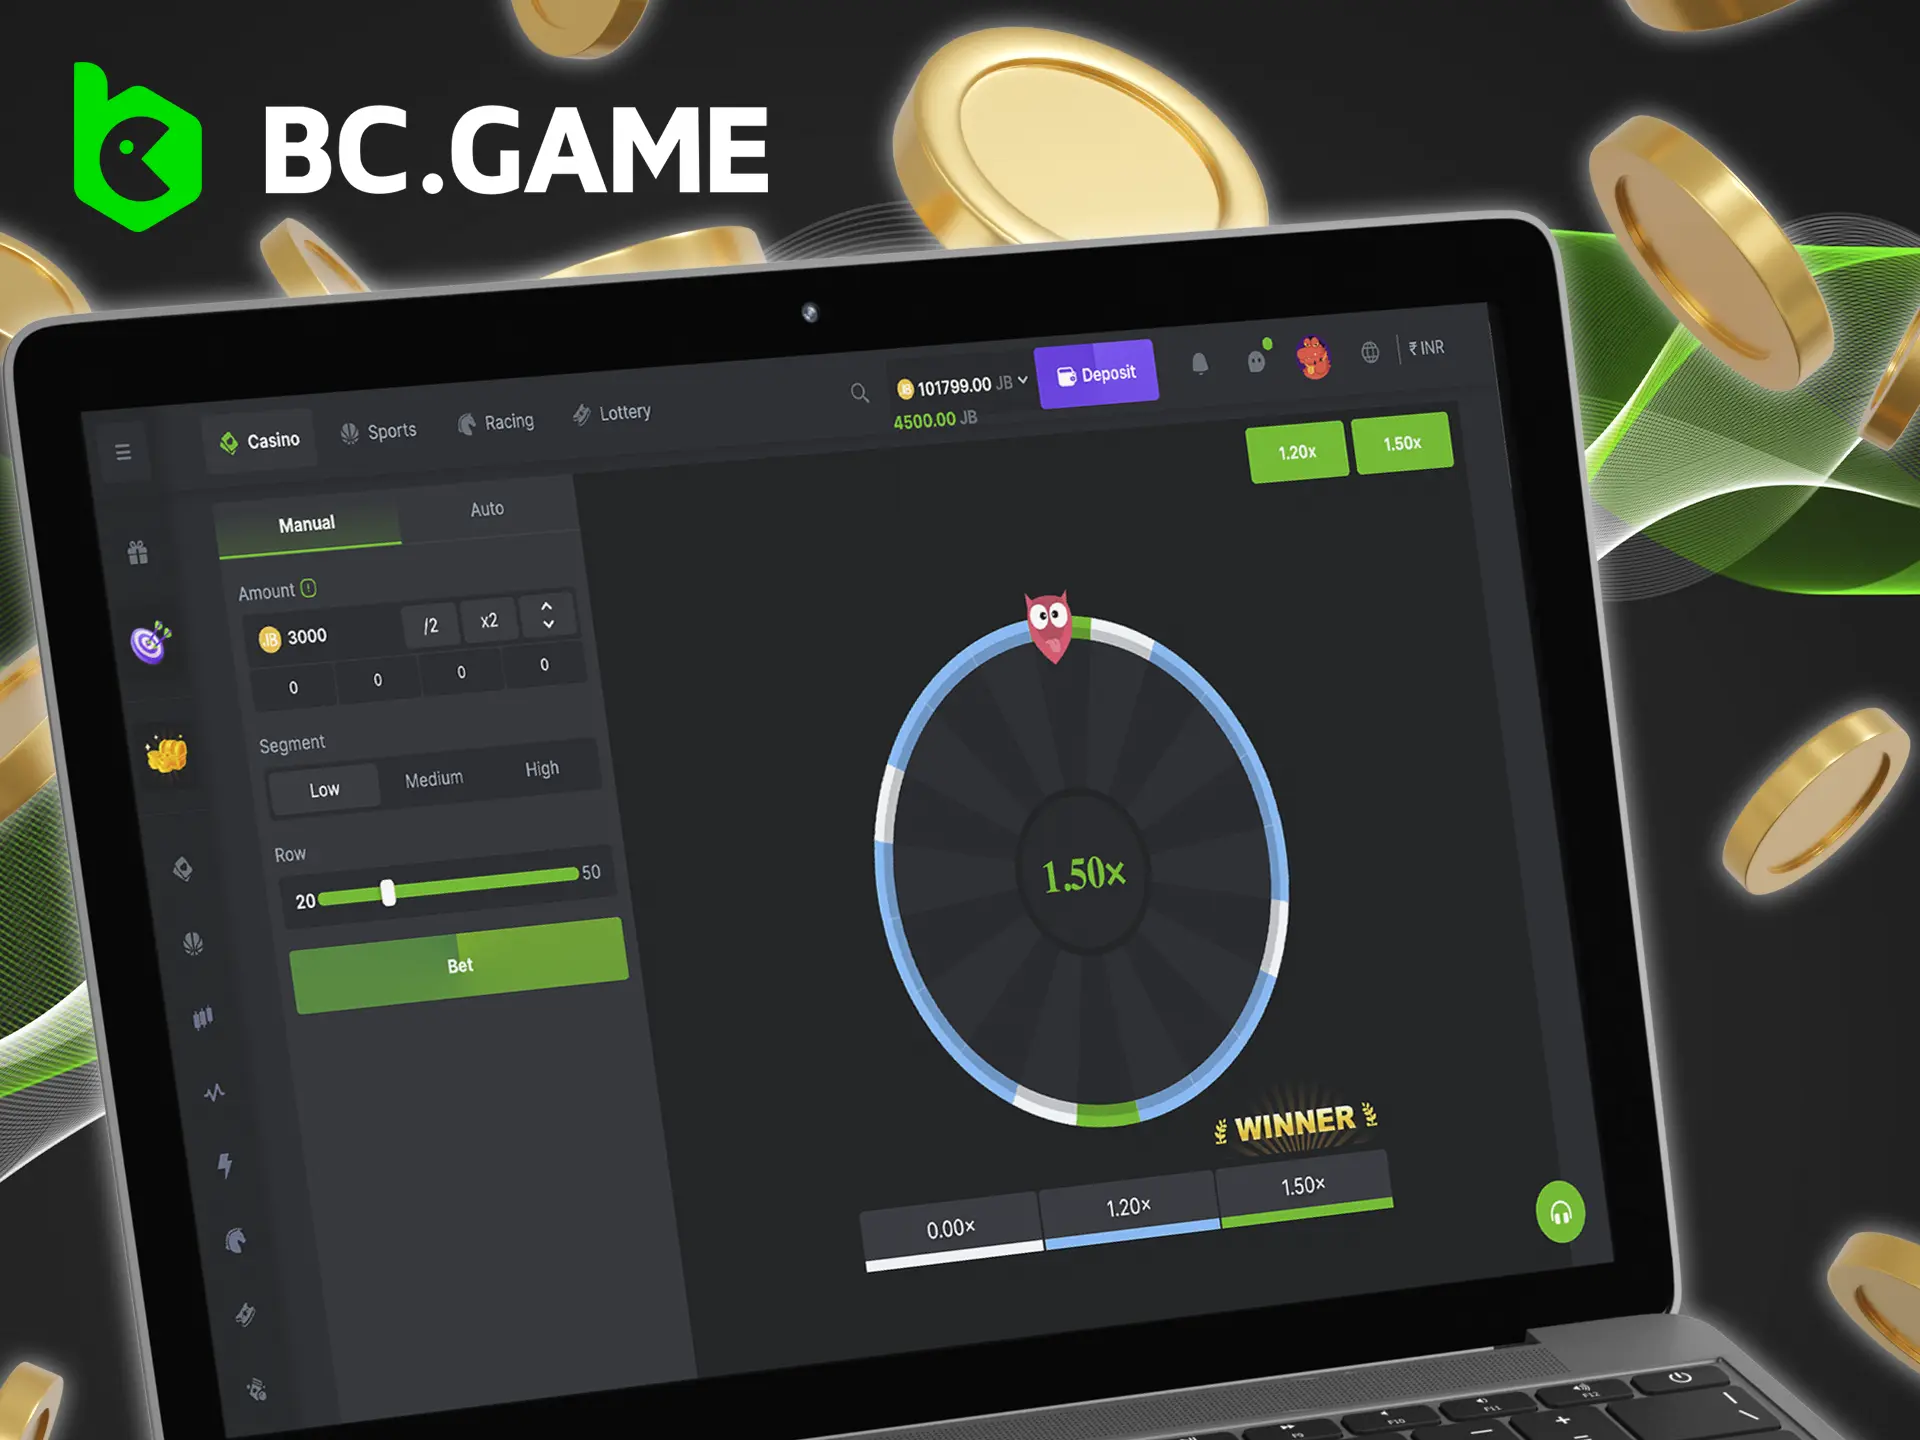 Try using bonus coins from BC Game Casino on the best slots.